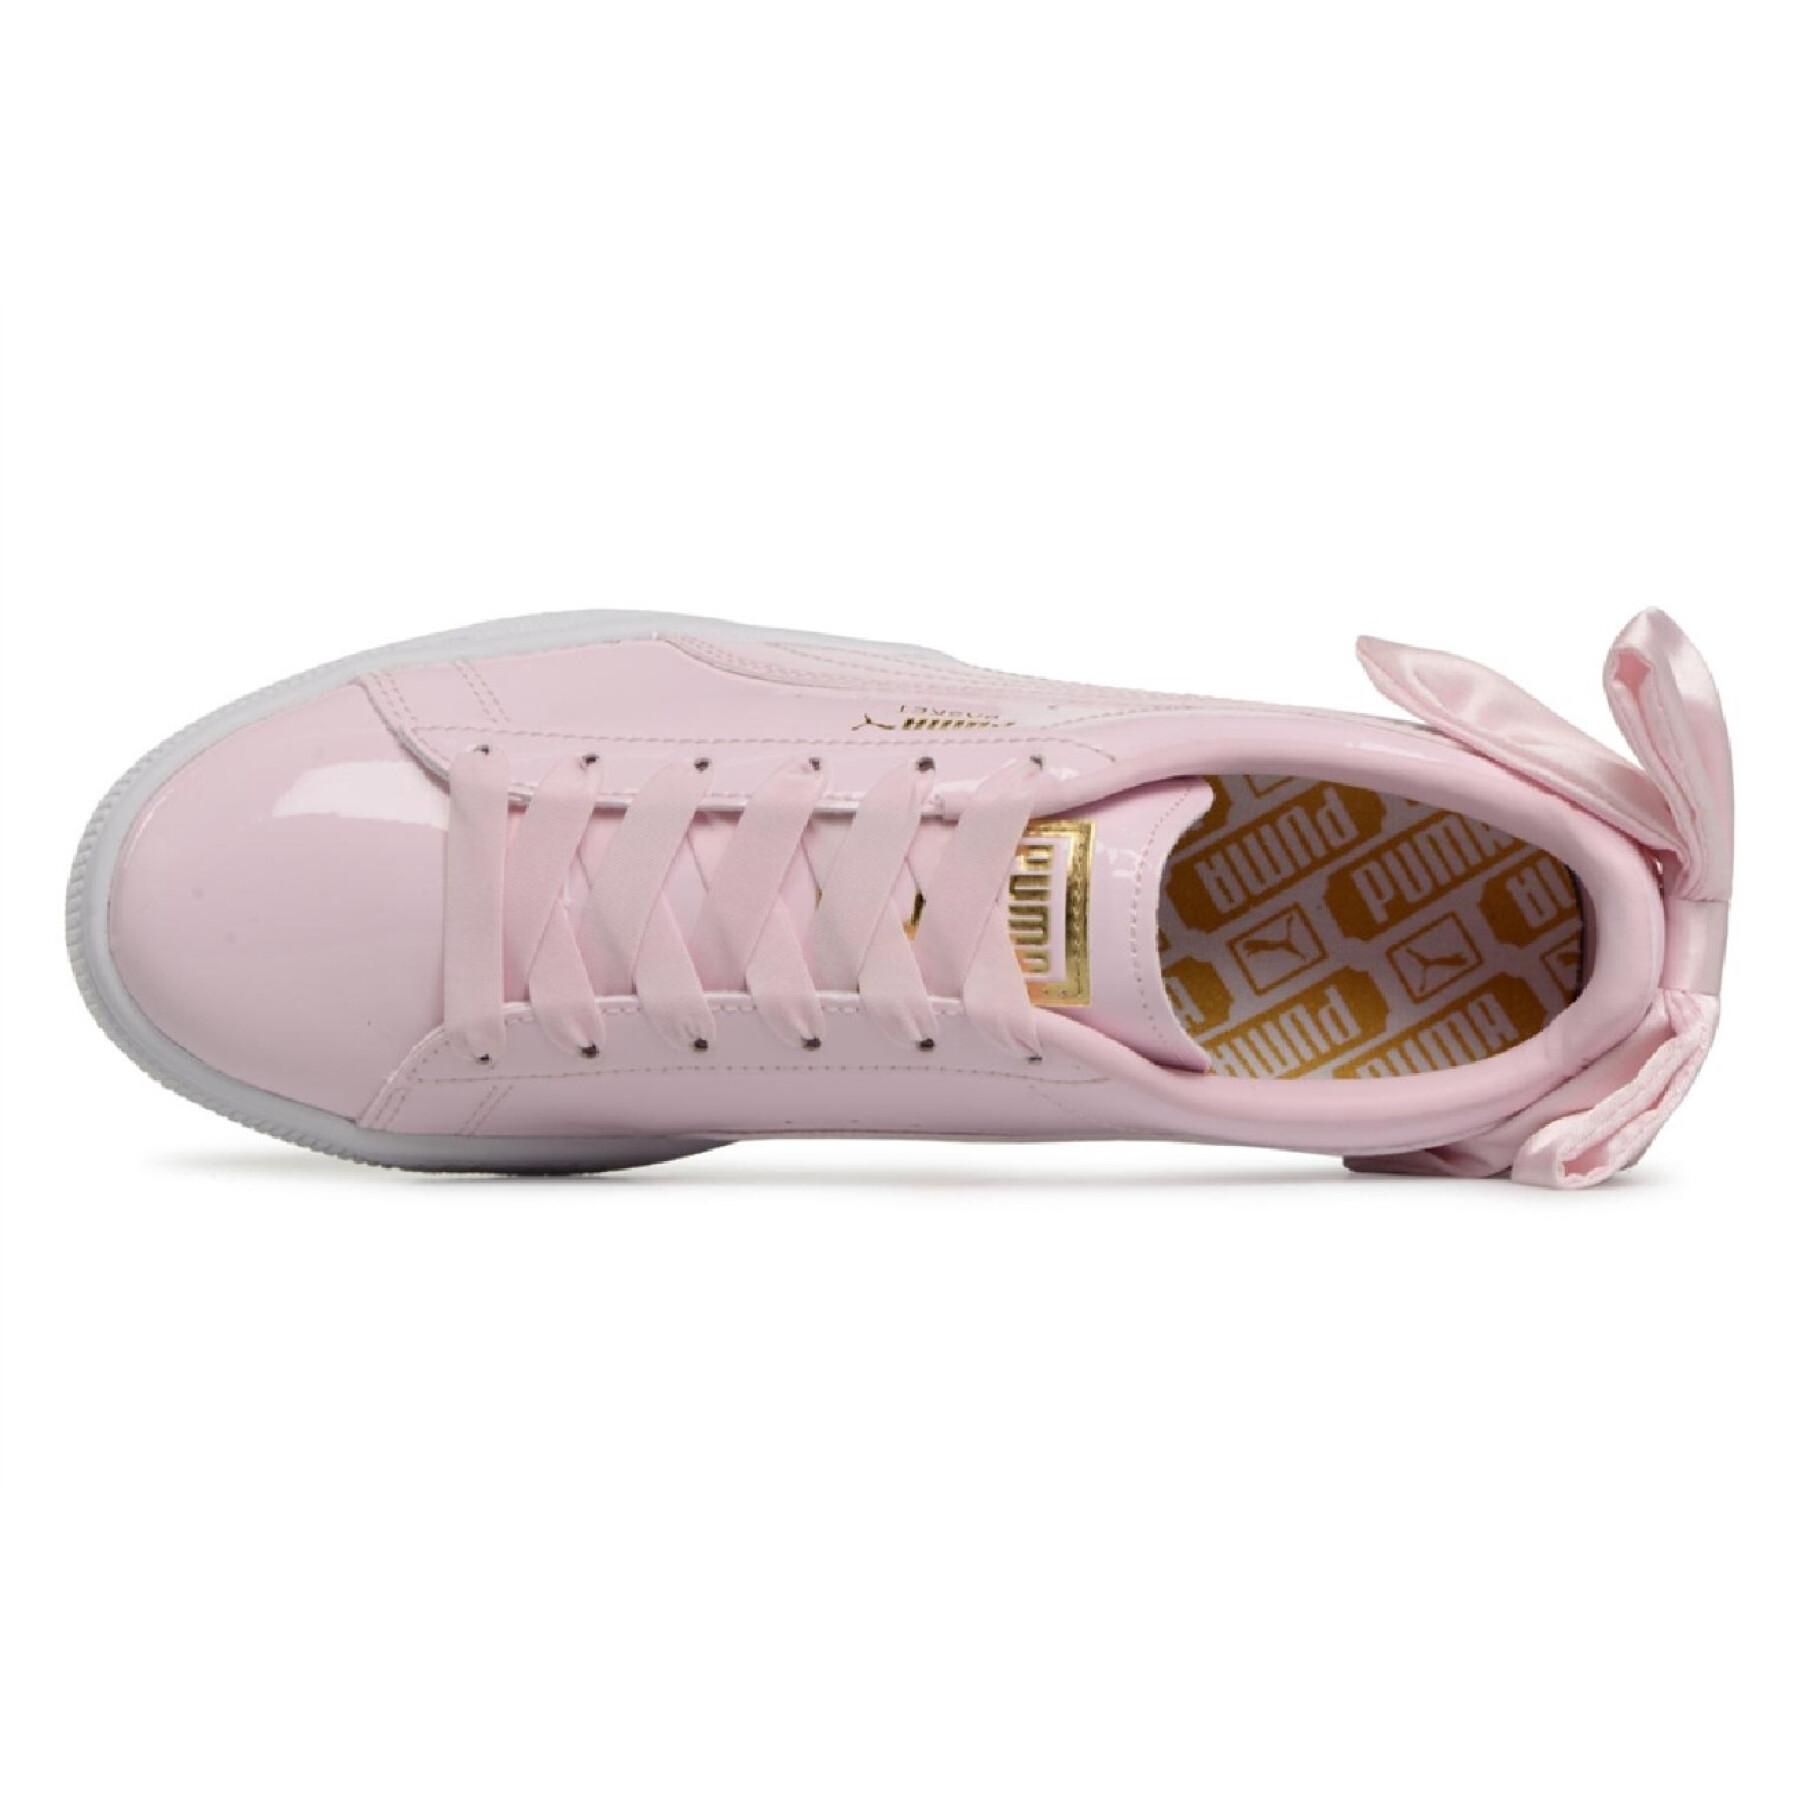 Women's sneakers Puma Suede Bow Patent